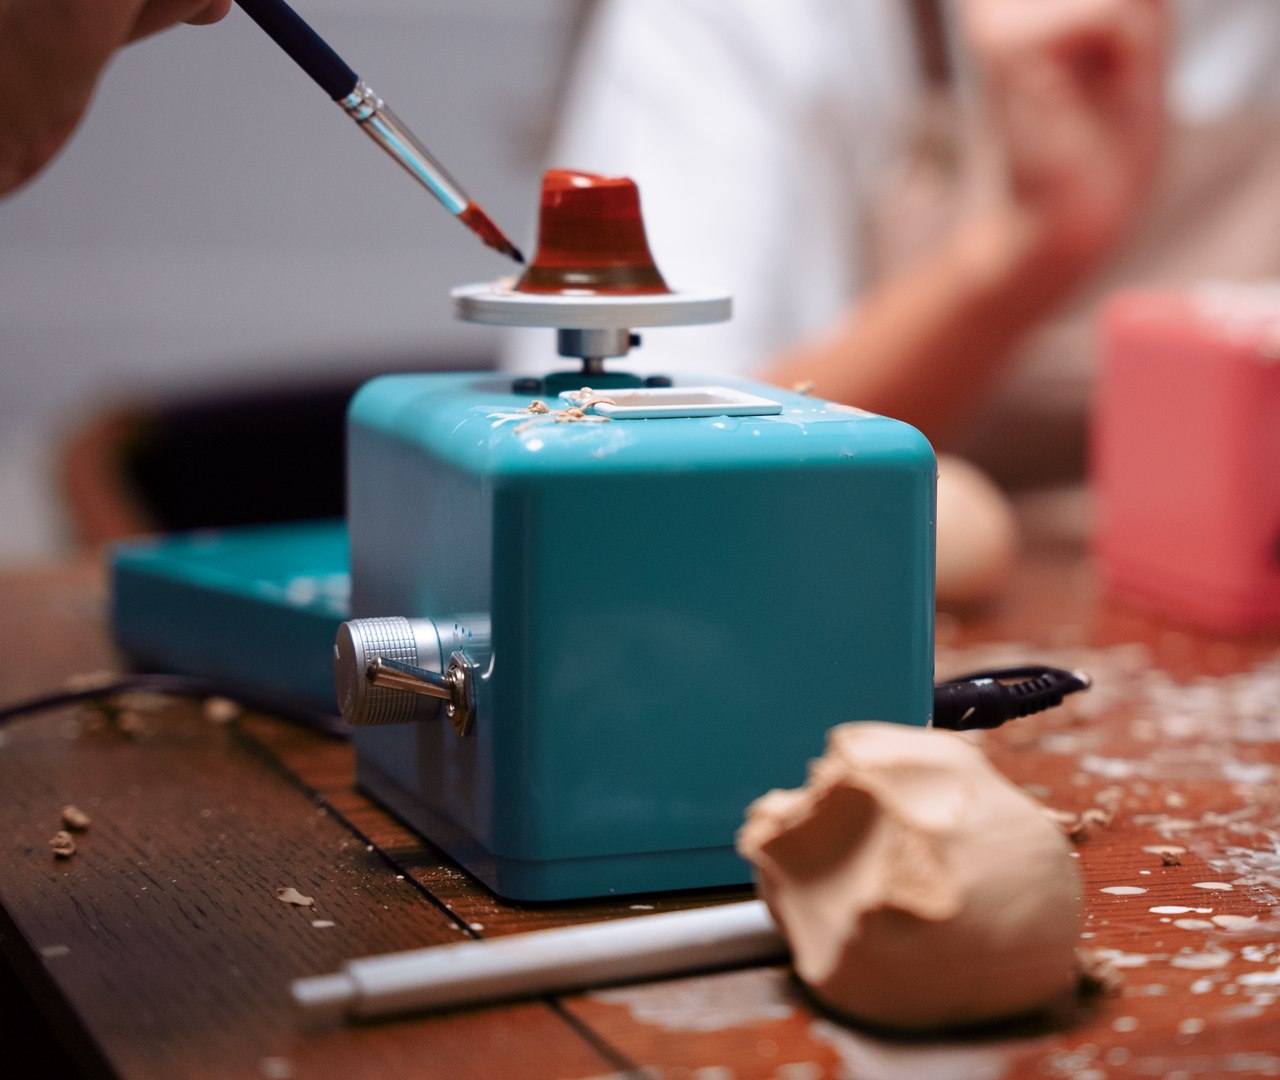 Tiny portable potter's wheel lets you throw down your clay and make  miniature artpieces anywhere - Yanko Design